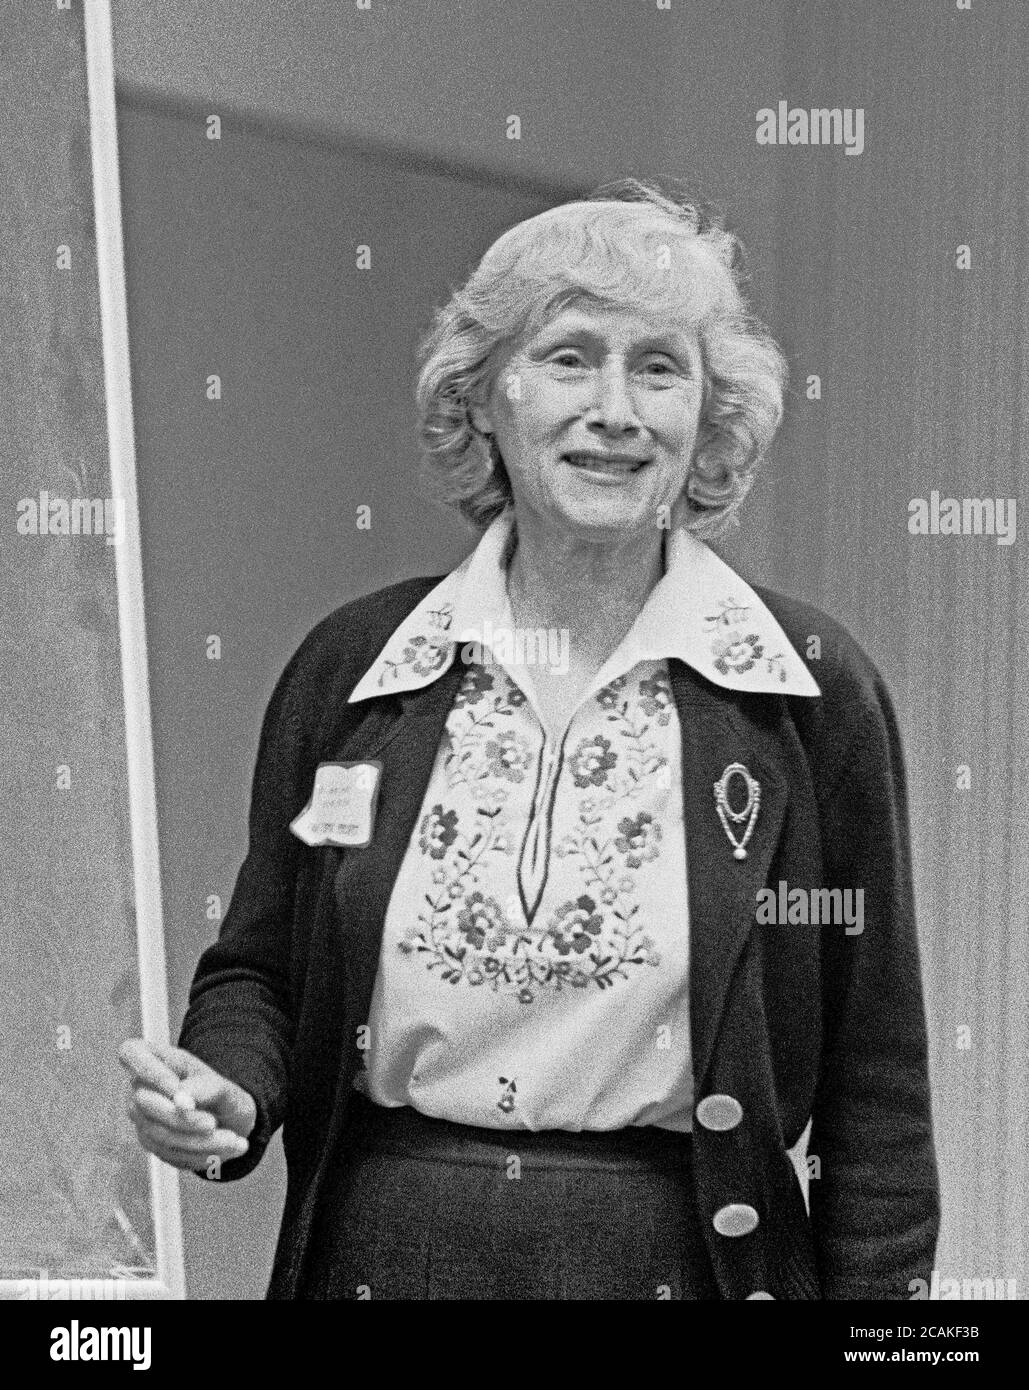 Marjorie Guthrie, wife of Woody Guthrie, mother of Arlo Guthrie,  at a seminar about health in San Francisco Stock Photo